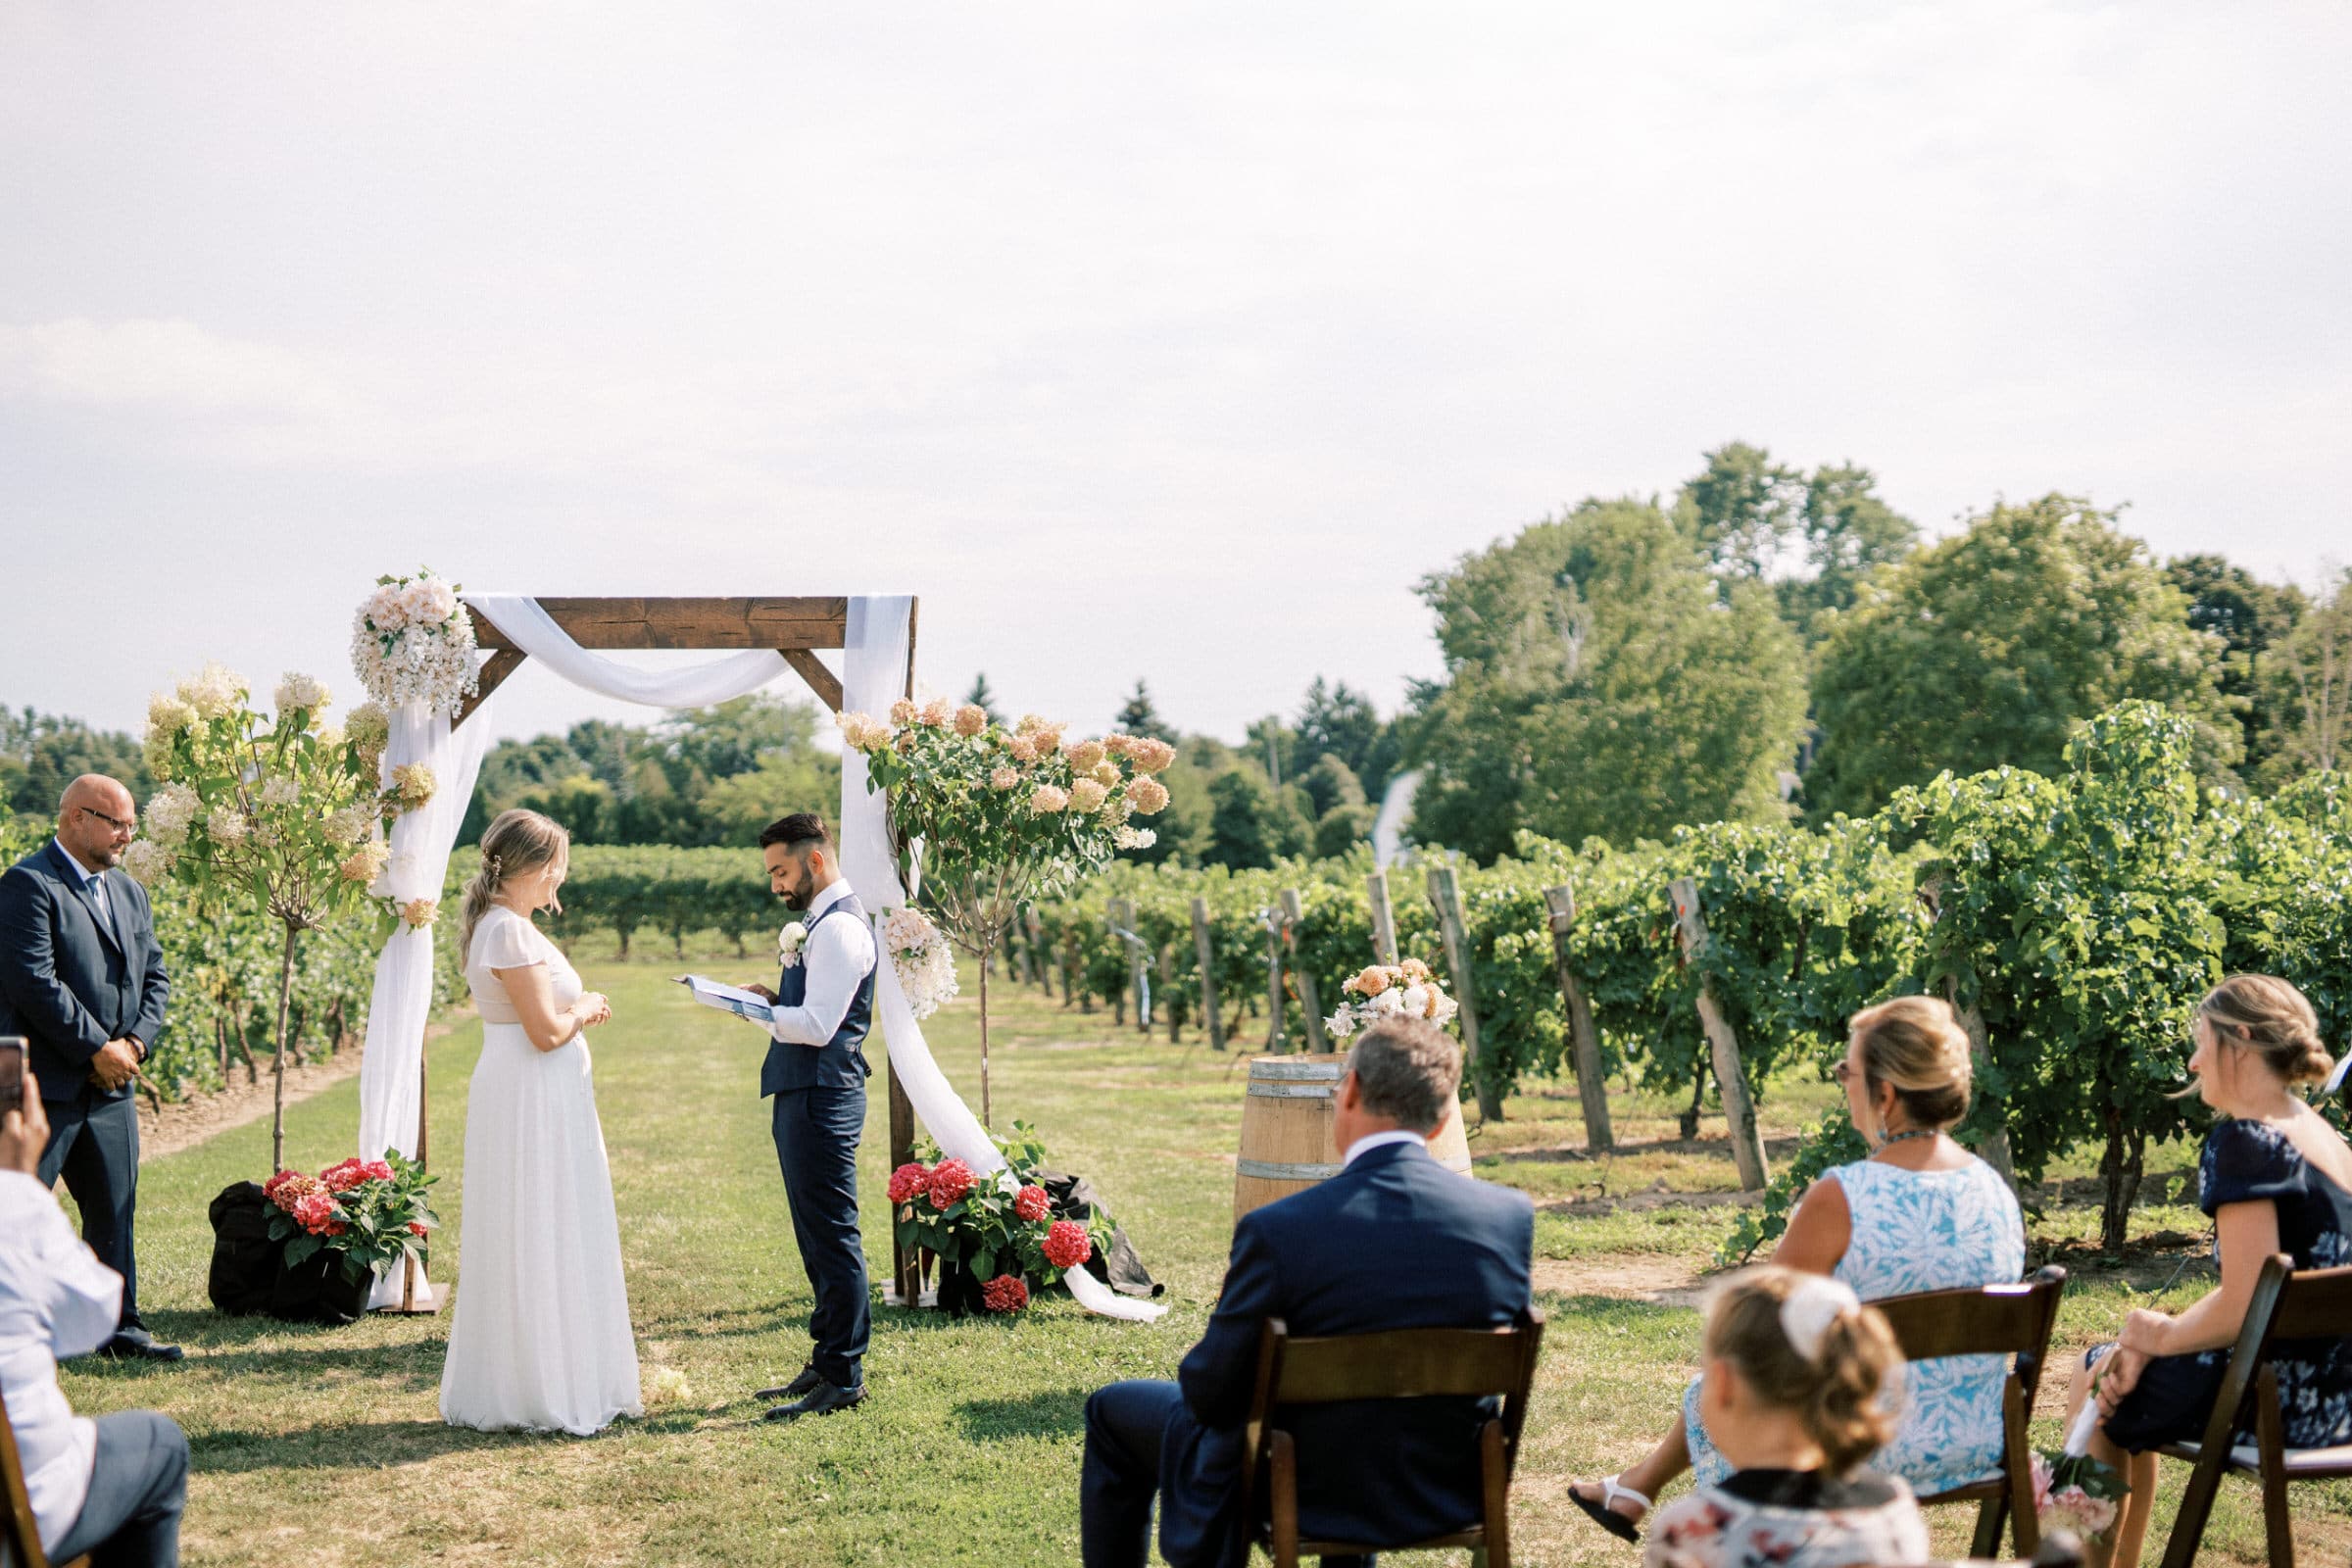 Bride & Groom Reading Vows at Intimate Wedding in Niagara on the Lake